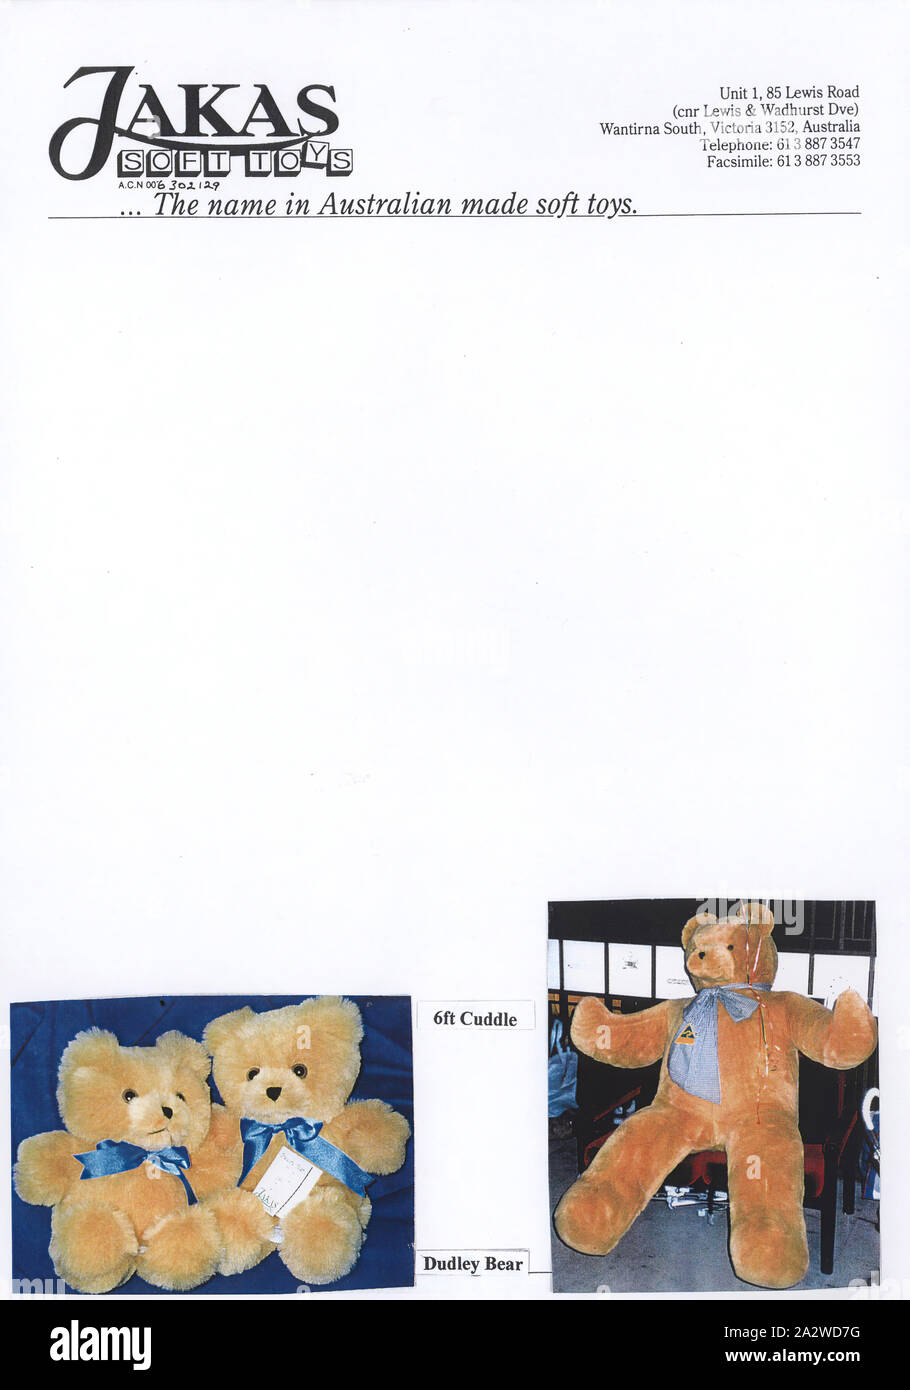 Advertising Flyer - Jakas Soft Toys, 'Dudley Bear' & 'Cuddle Bear', Melbourne, circa 1998, A single page advertising flyer showing two images of teddy bear designs, 'Dudley Bear' and a six foot tall 'Cuddle Bear' known as Big Ted. Jakas Soft Toys was a Melbourne-based company which designed and manufactured genuine high quality soft toys from 1956. Their range included teddy bears, golliwogs and Australian native animals. Jakas Soft Toys ceased production in the late 1990s Stock Photo